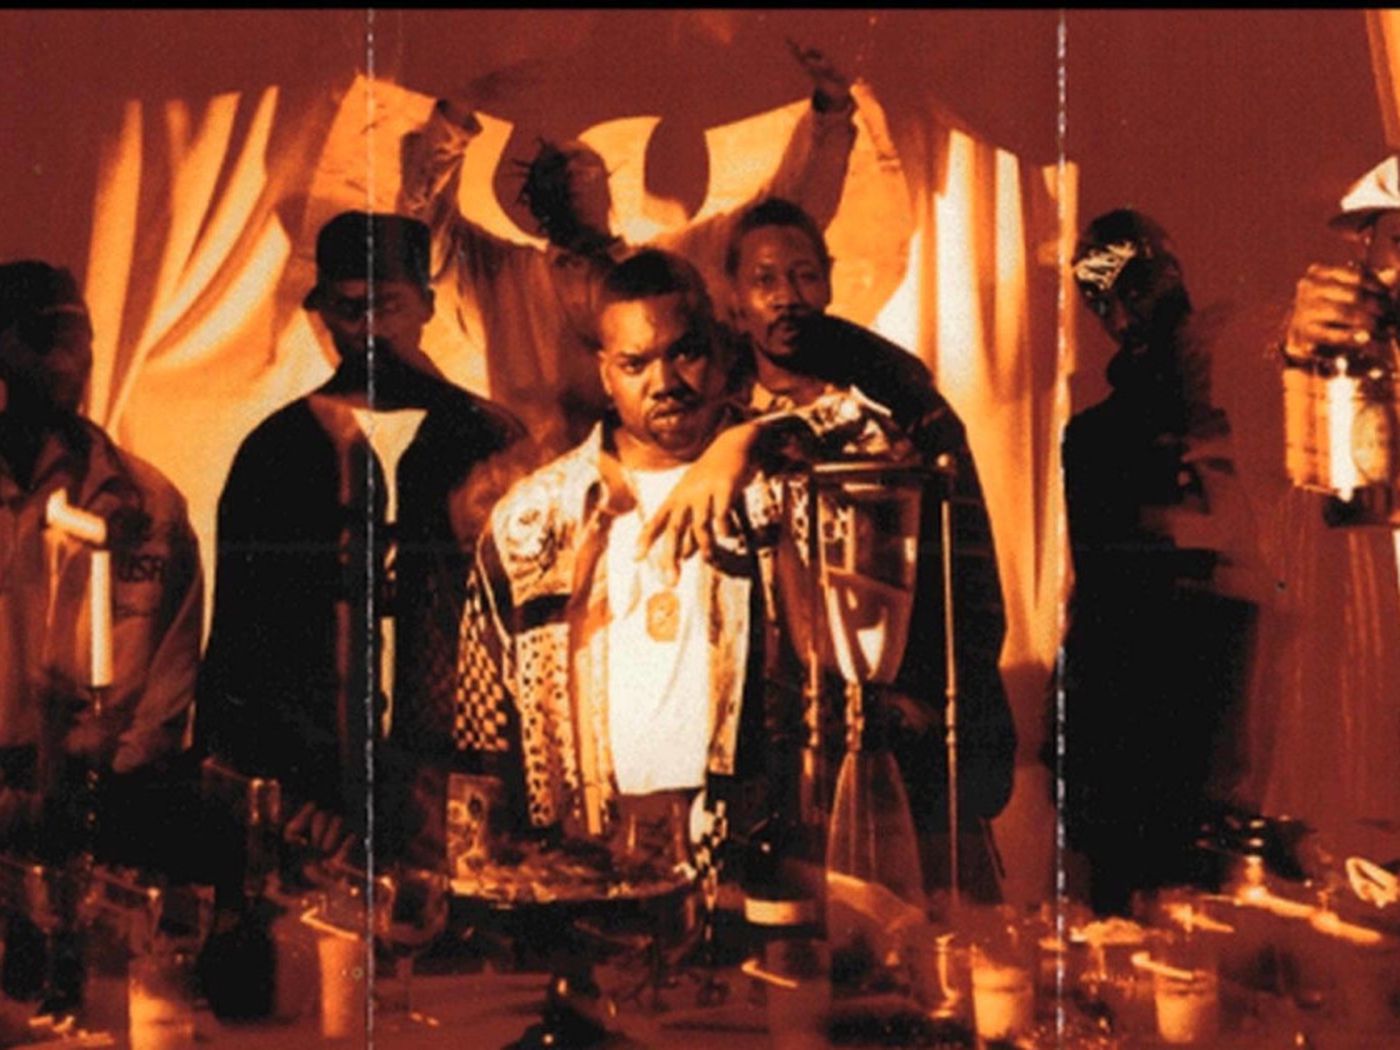 years ago, Raekwon delivered the rap album equivalent to Scarface